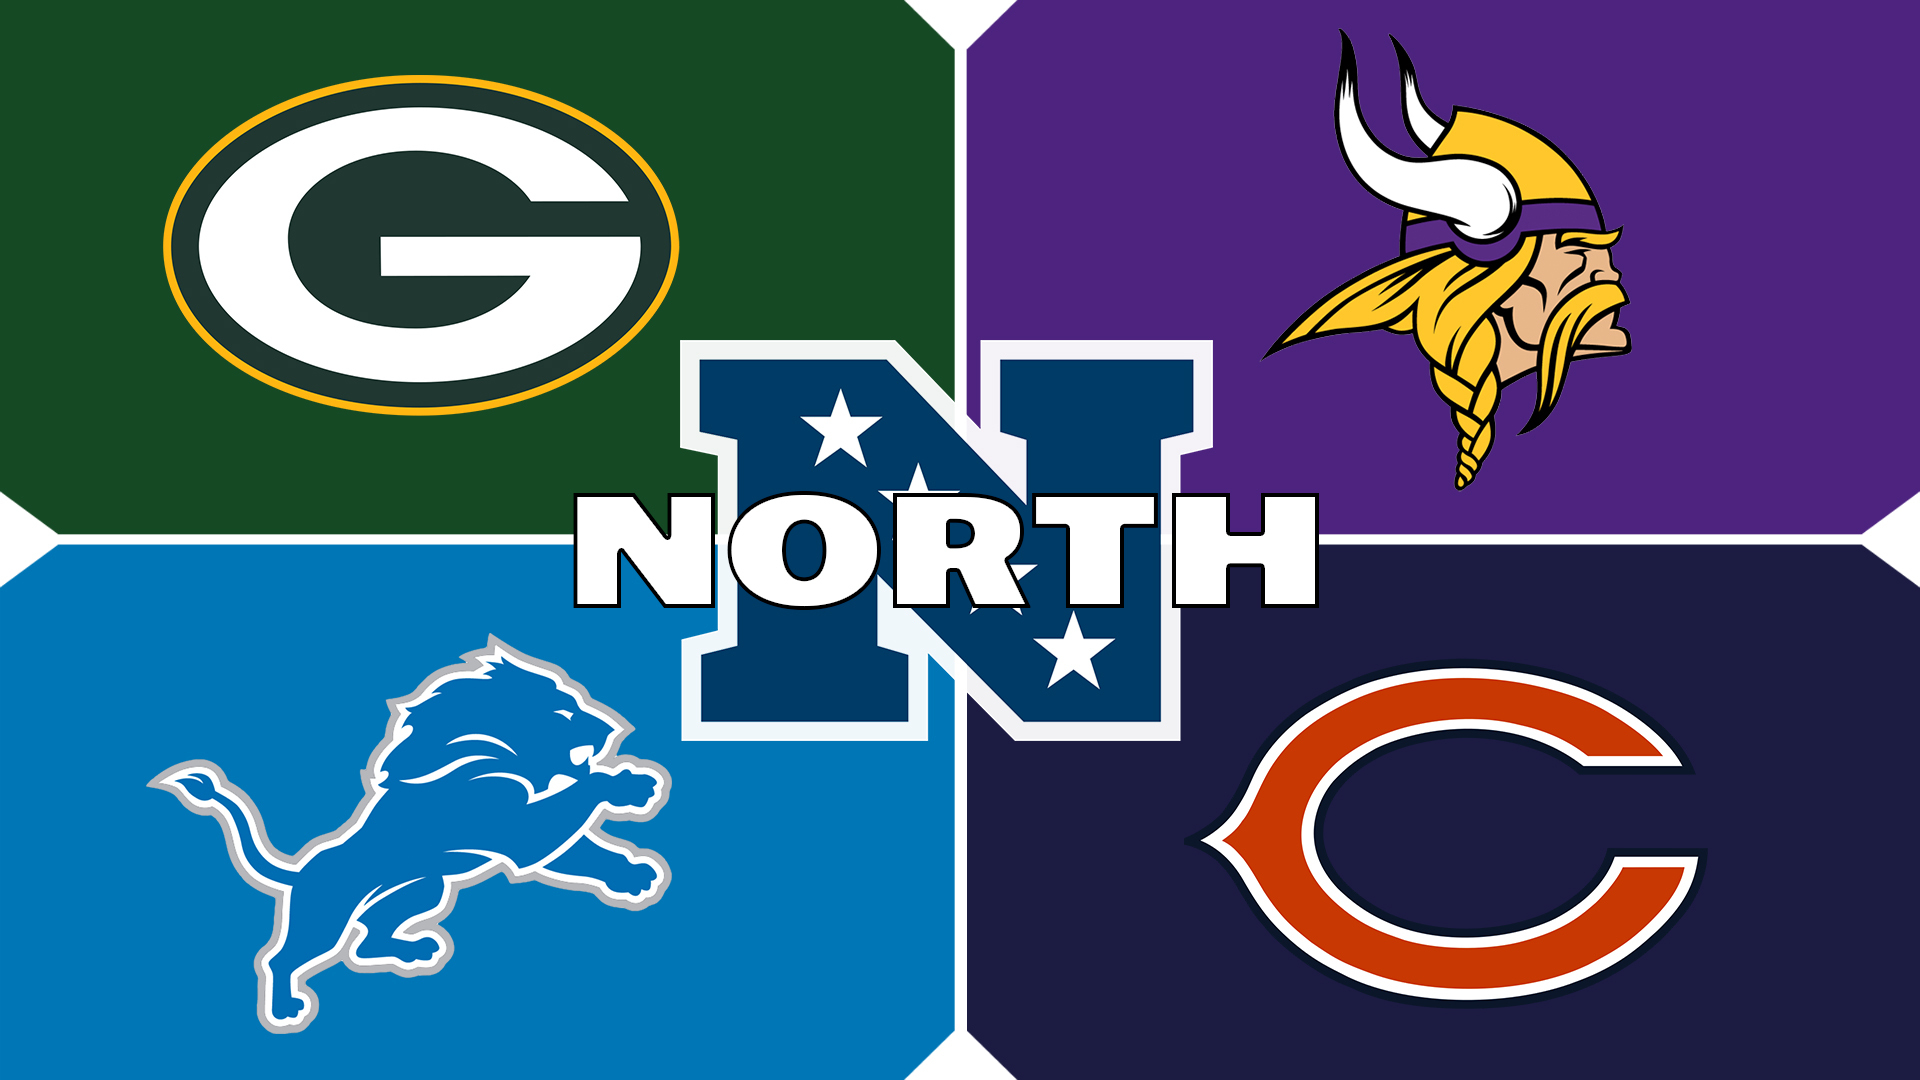 Are Aaron Rodgers and the Packers still the team to beat in the NFC North?